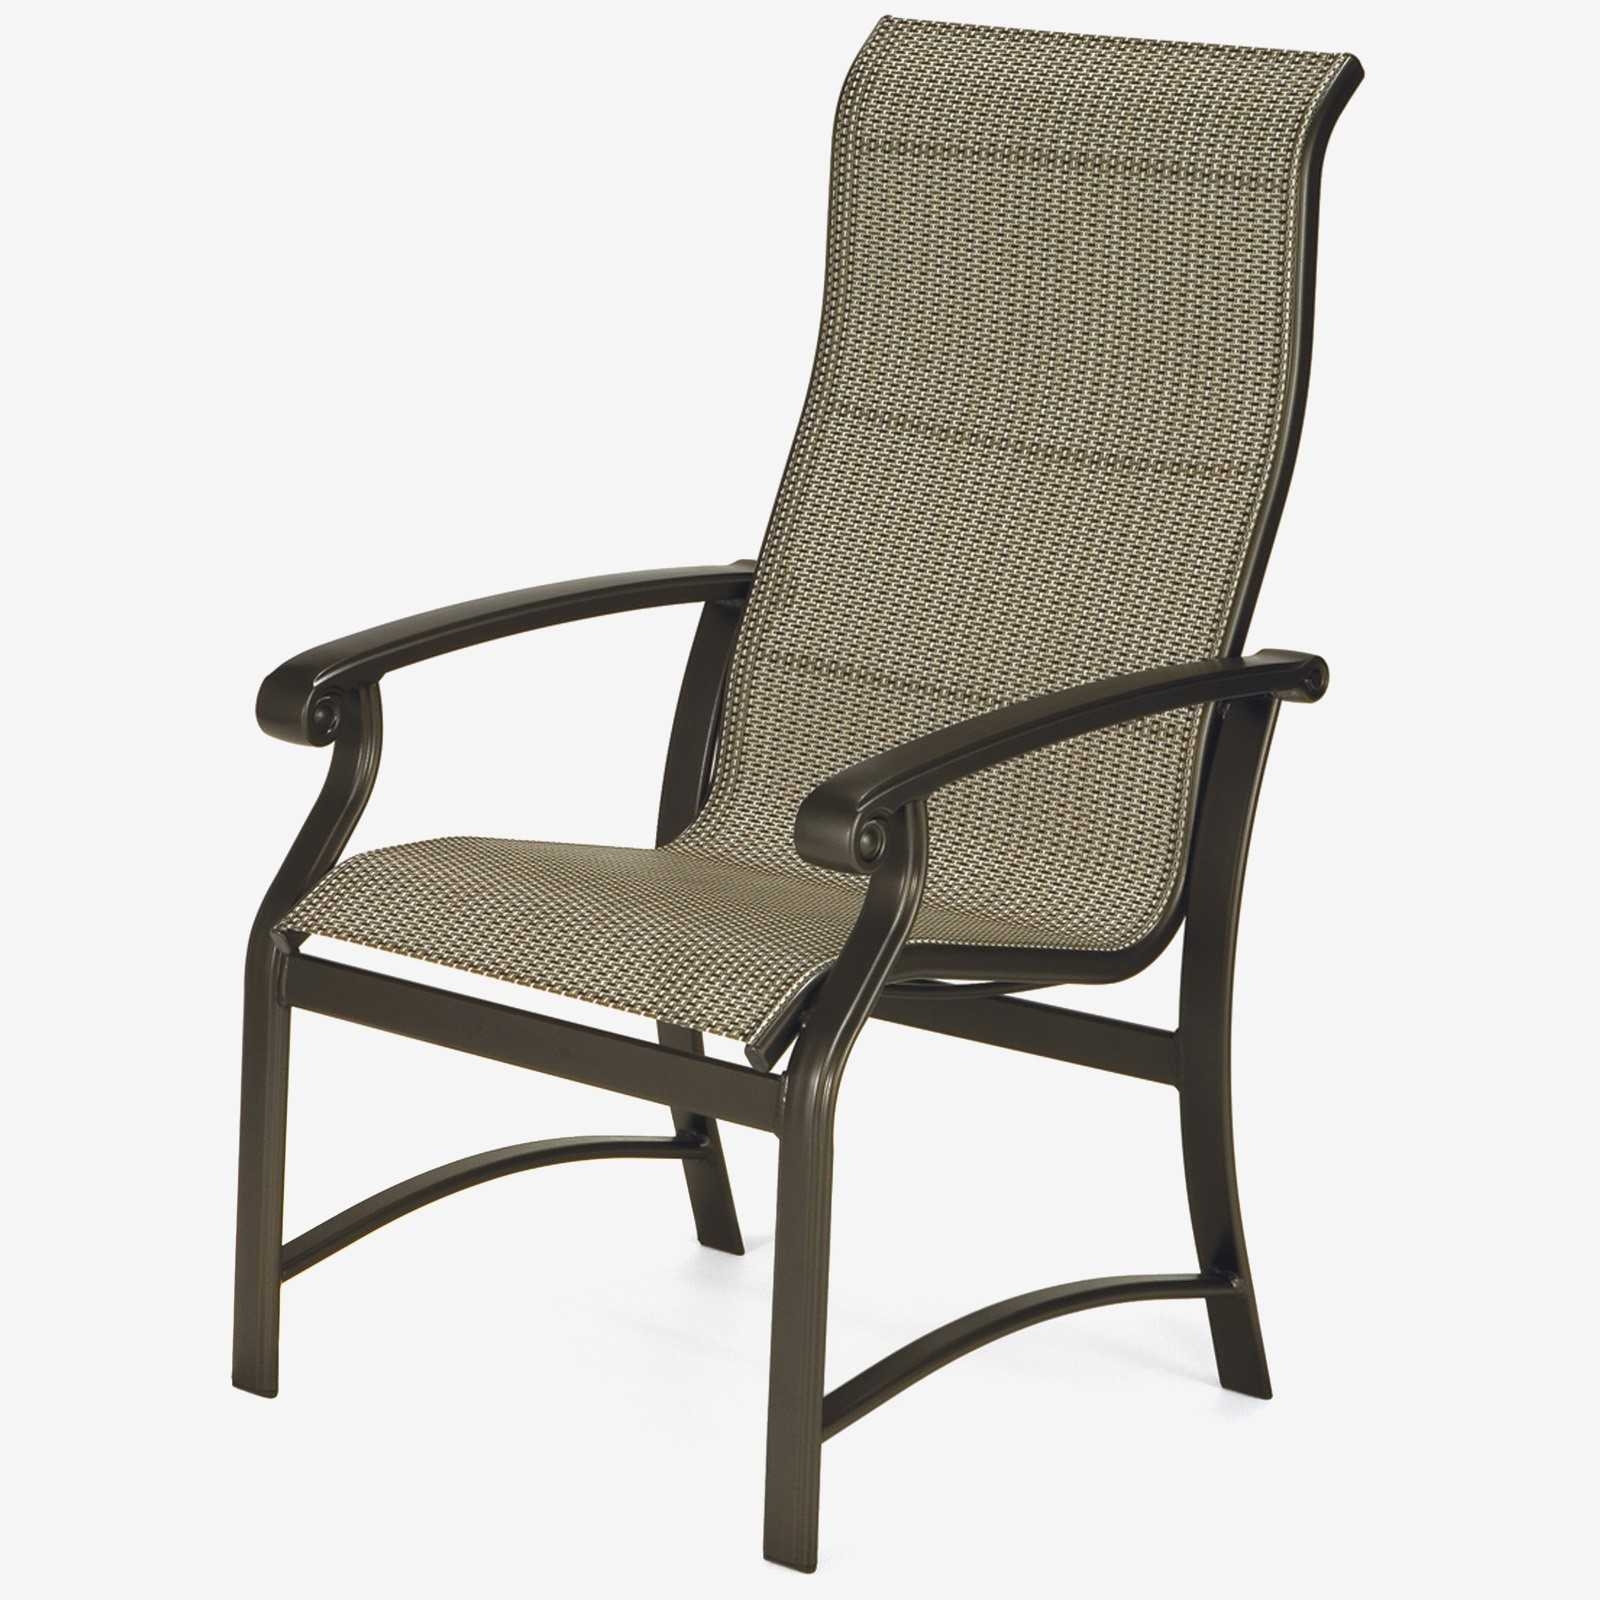 High Back Patio Chairs Visualhunt, High Back Patio Chairs With Ottoman